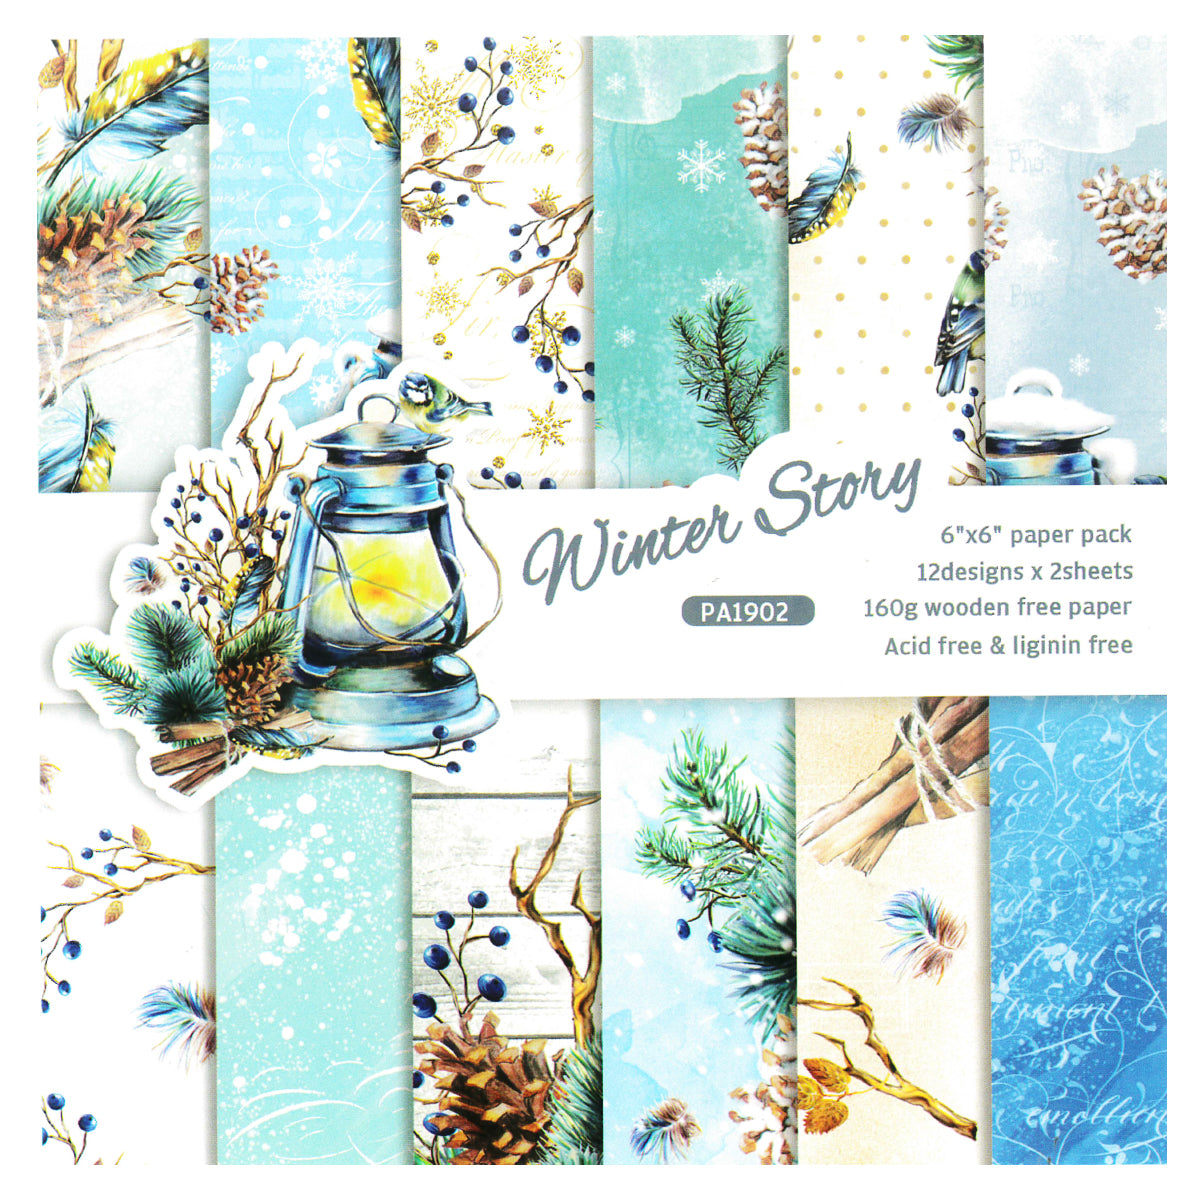 Wrapables 6x6 Decorative Single-Sided Scrapbook Paper for Arts & Crafts Projects, Scrapbooking, Card-Making, Snowy Winter Theme, Size: 24 Sheets